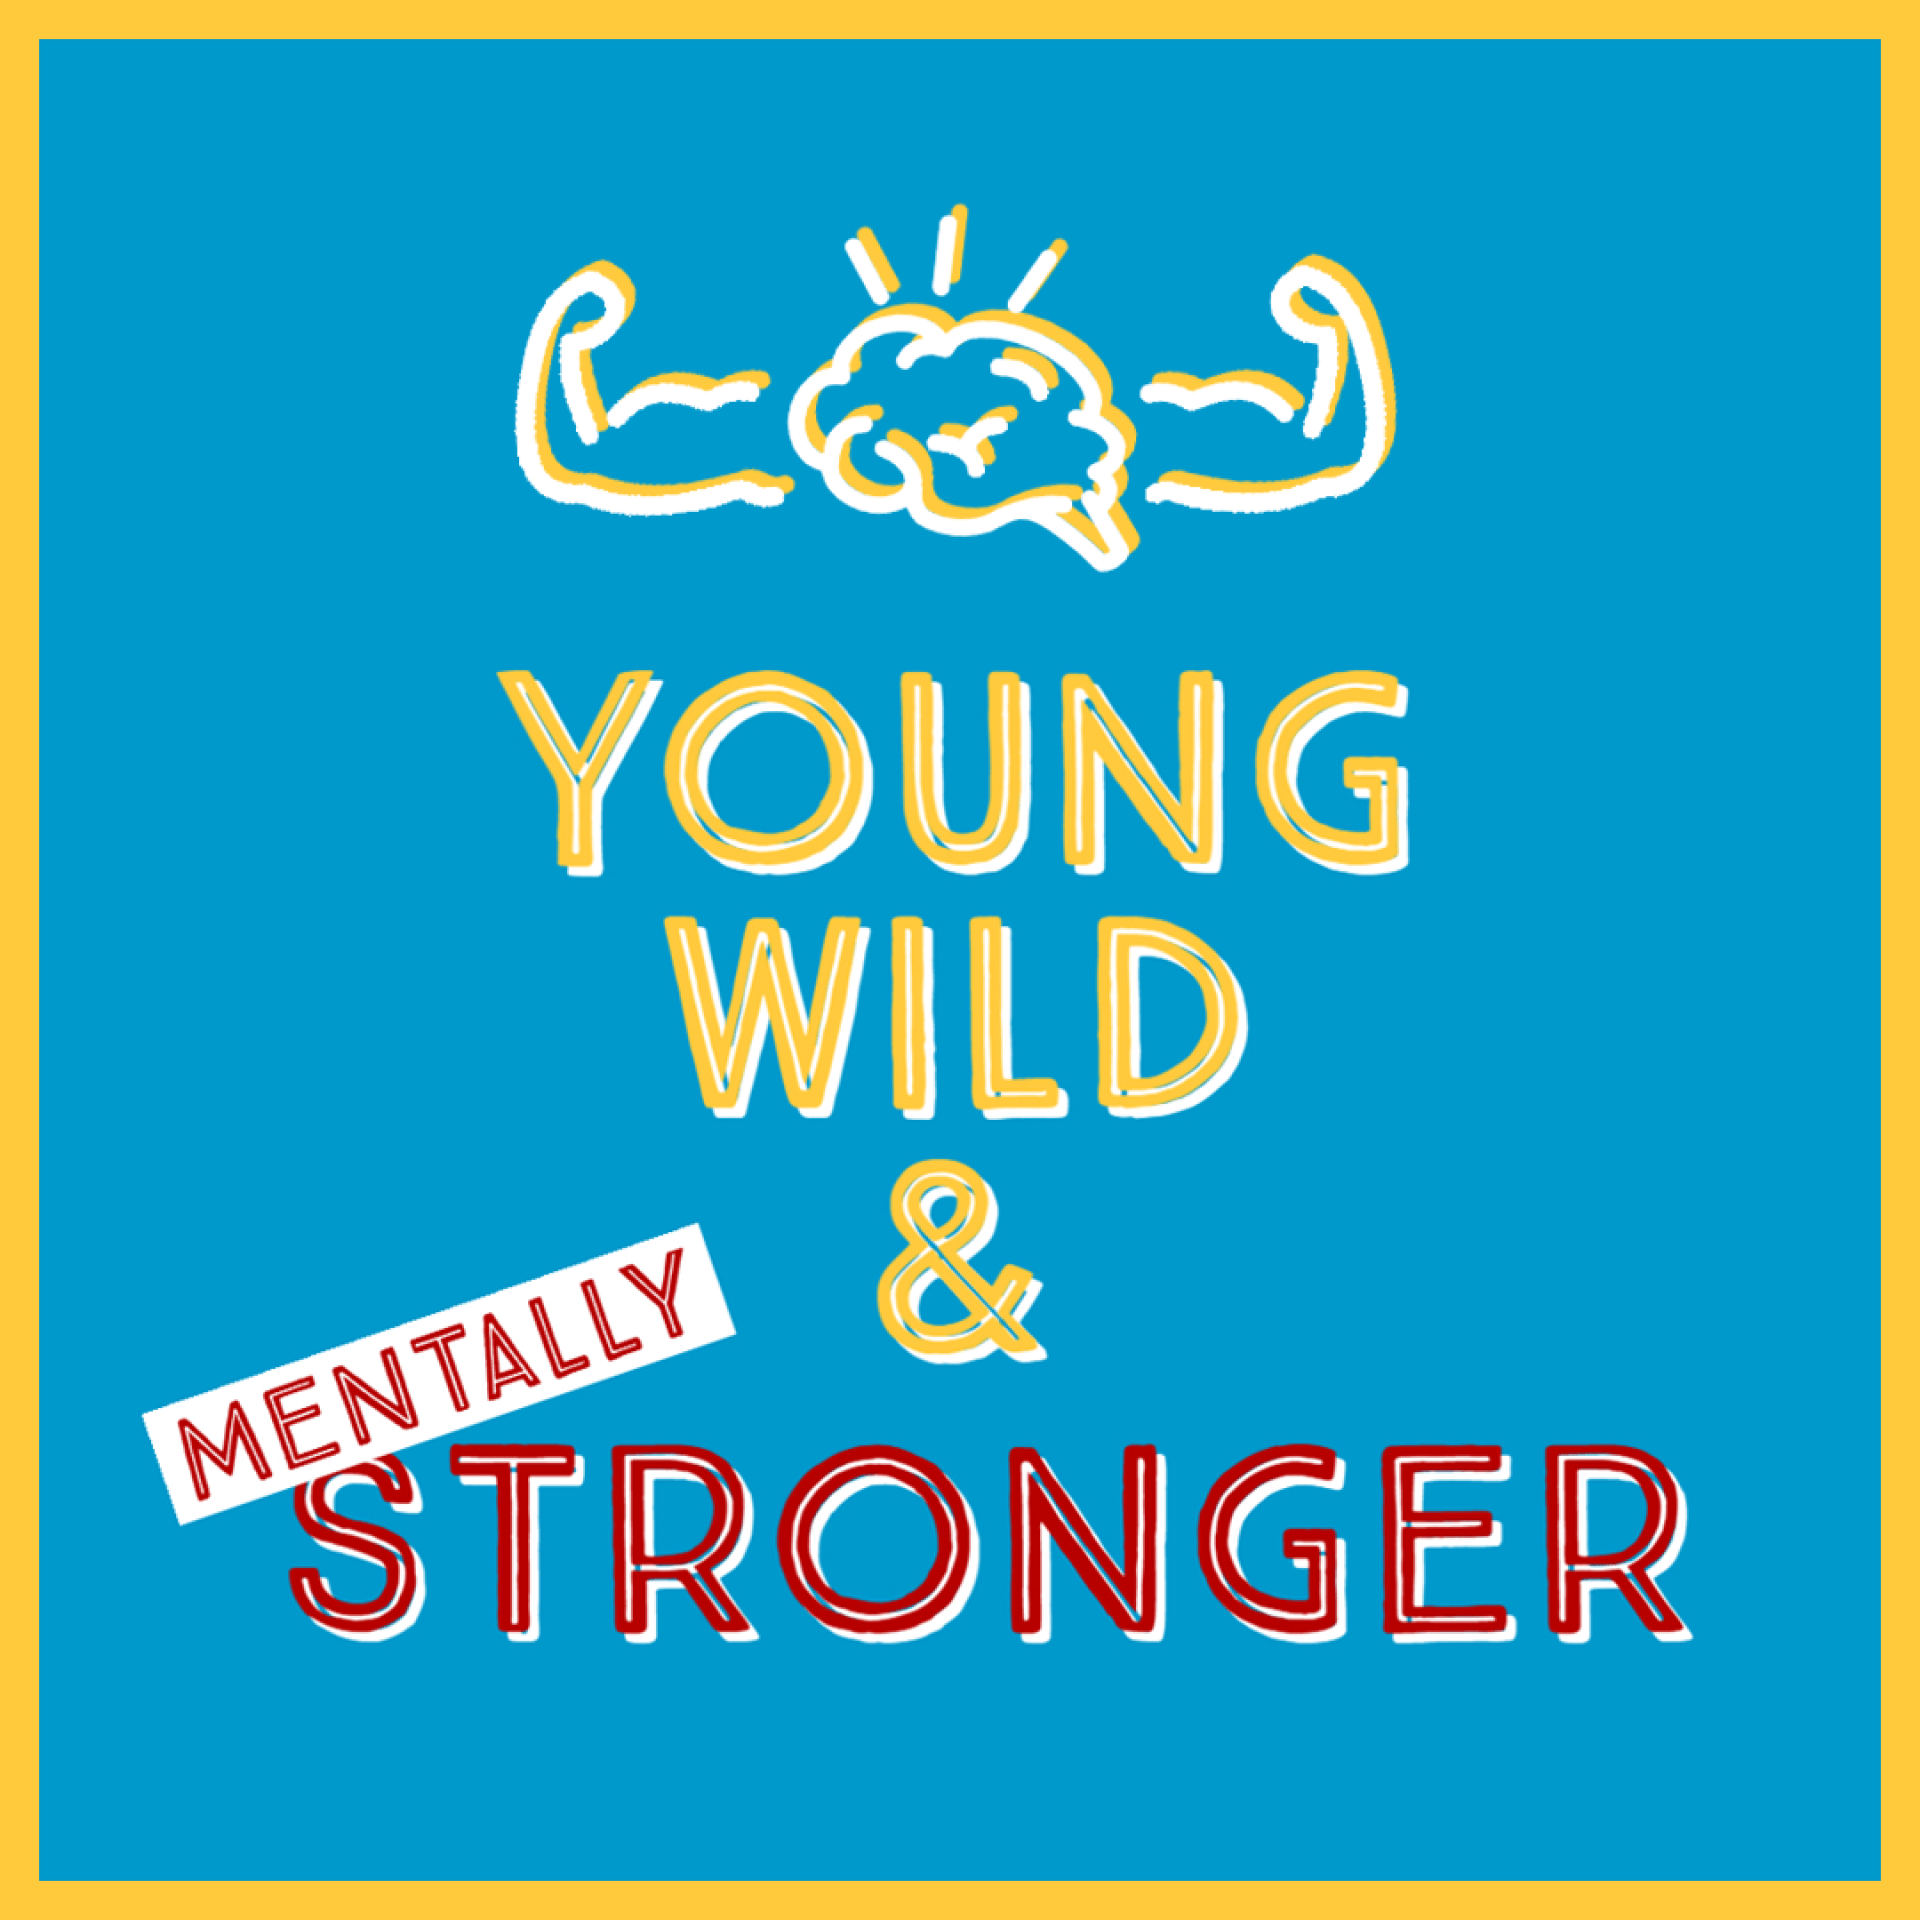 Young, wild & mentally stronger